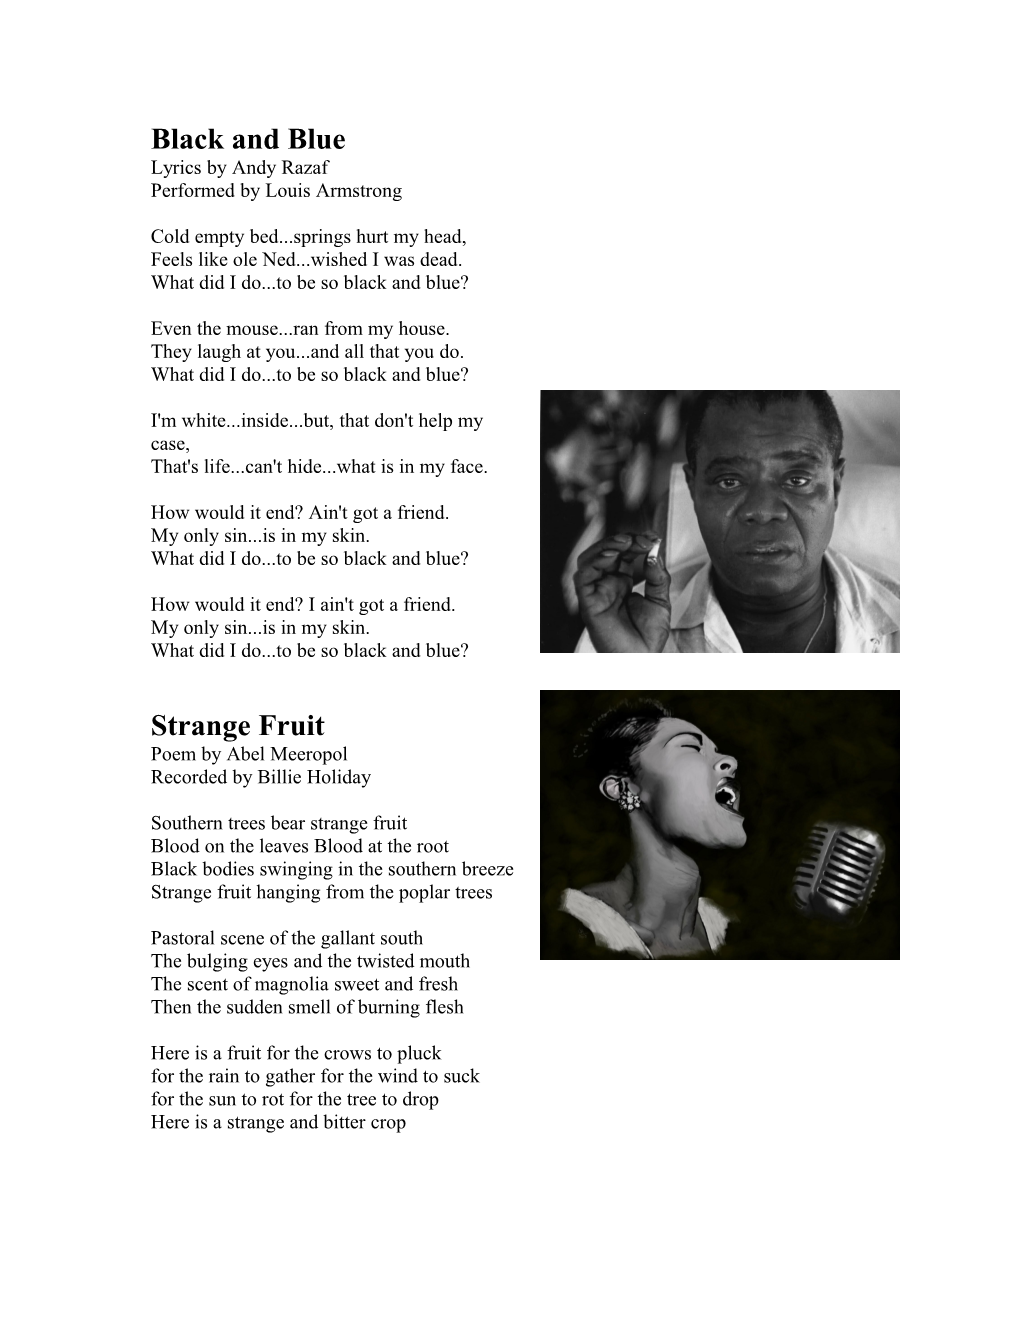 Lyrics by Andy Razaf Performed by Louis Armstrong